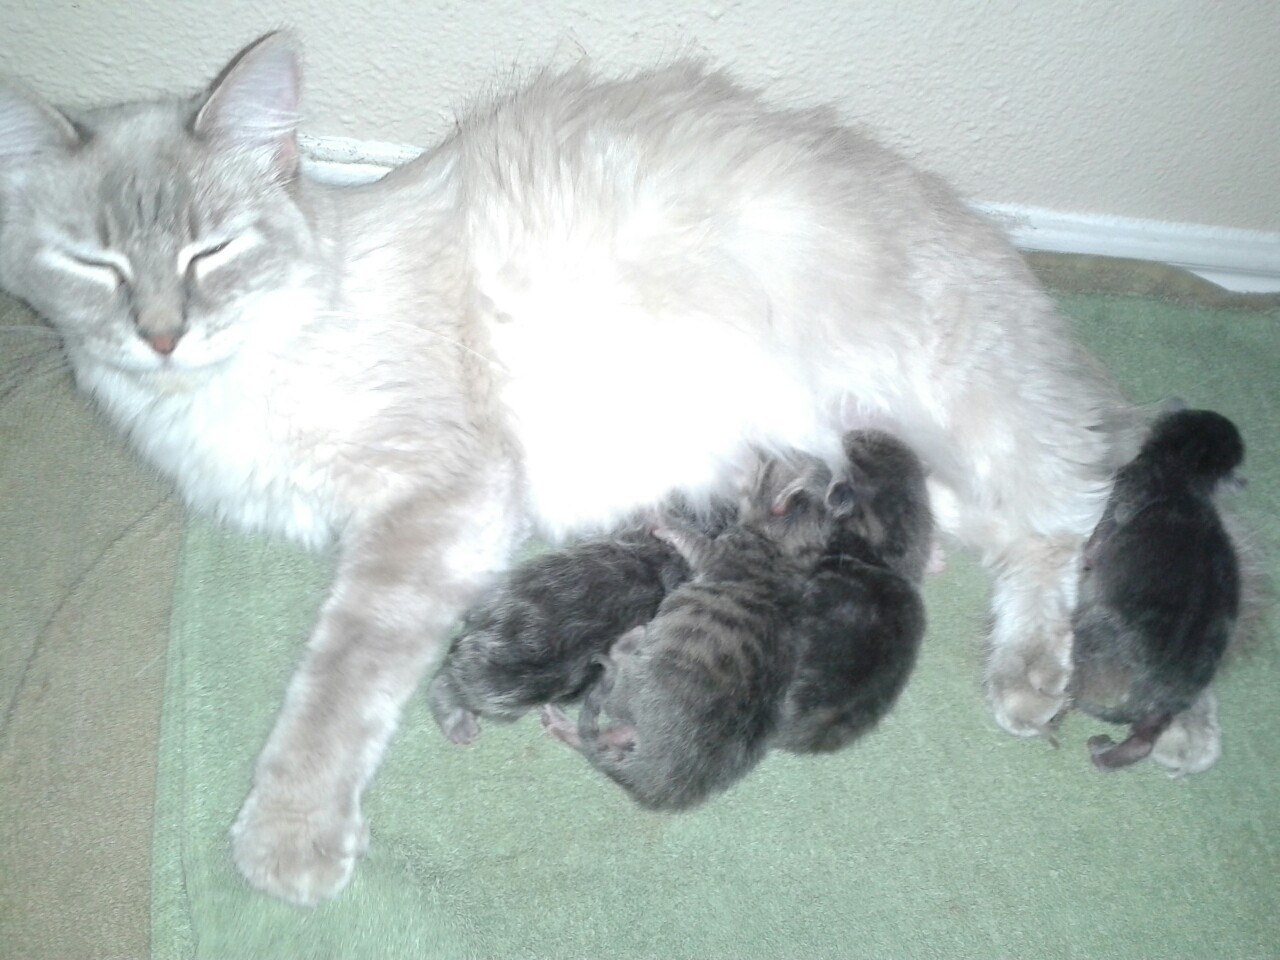 Was up super late last night with sasha delivering kittens!